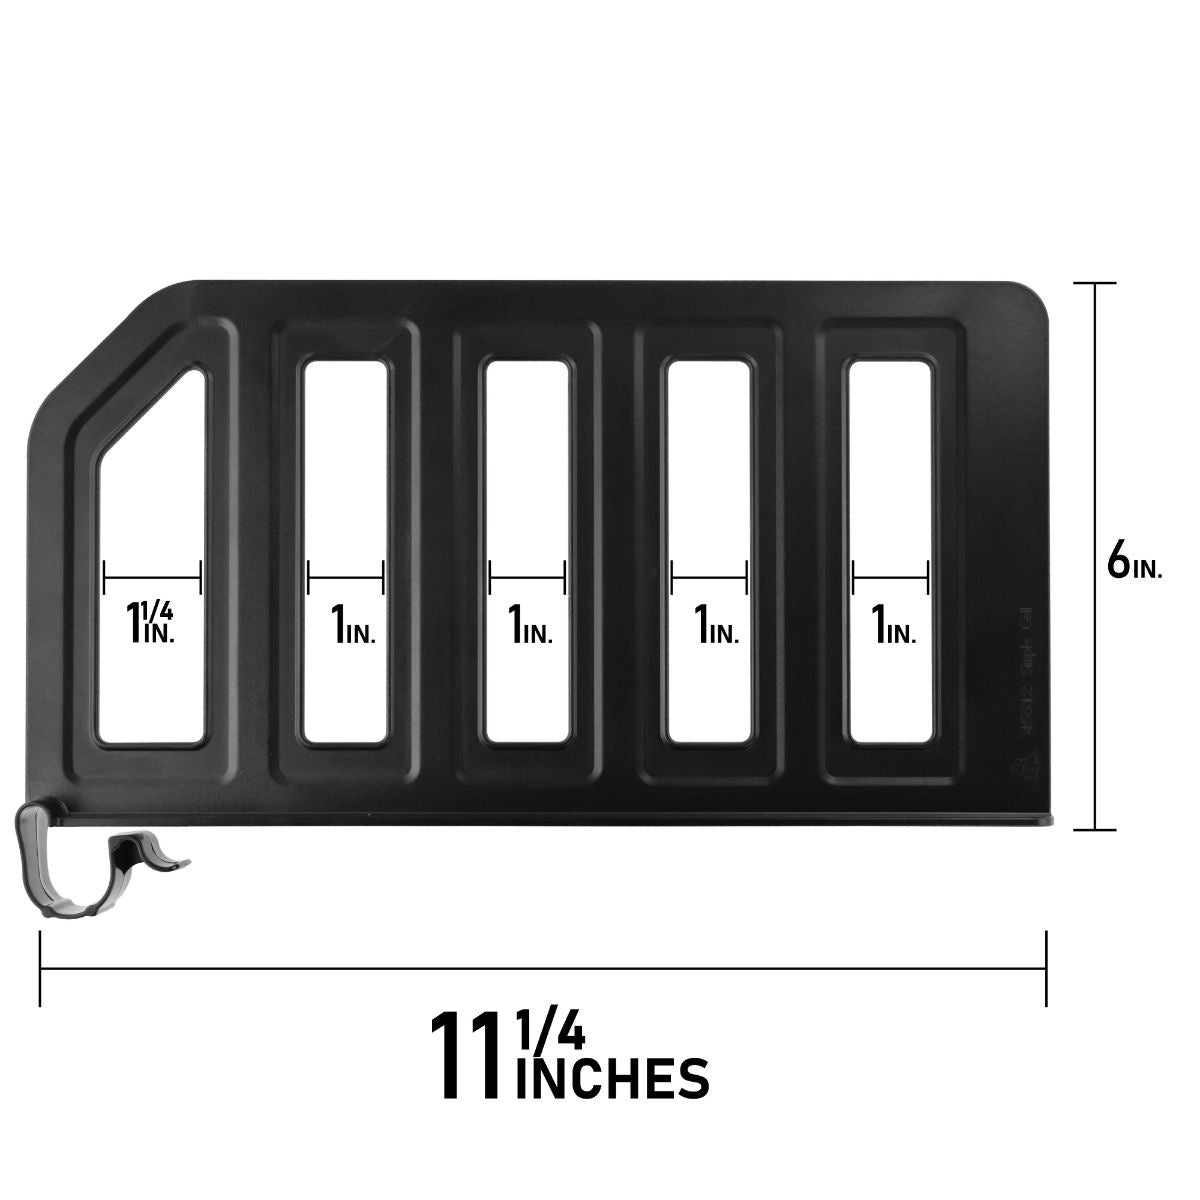 6 PACK of Clip-On (12 x 6 inch) Bookshelf & Retail Separator Product Dividers Home Improvement - Other Home Organization Simple Cell    - Simple Cell Bulk Wholesale Pricing - USA Seller